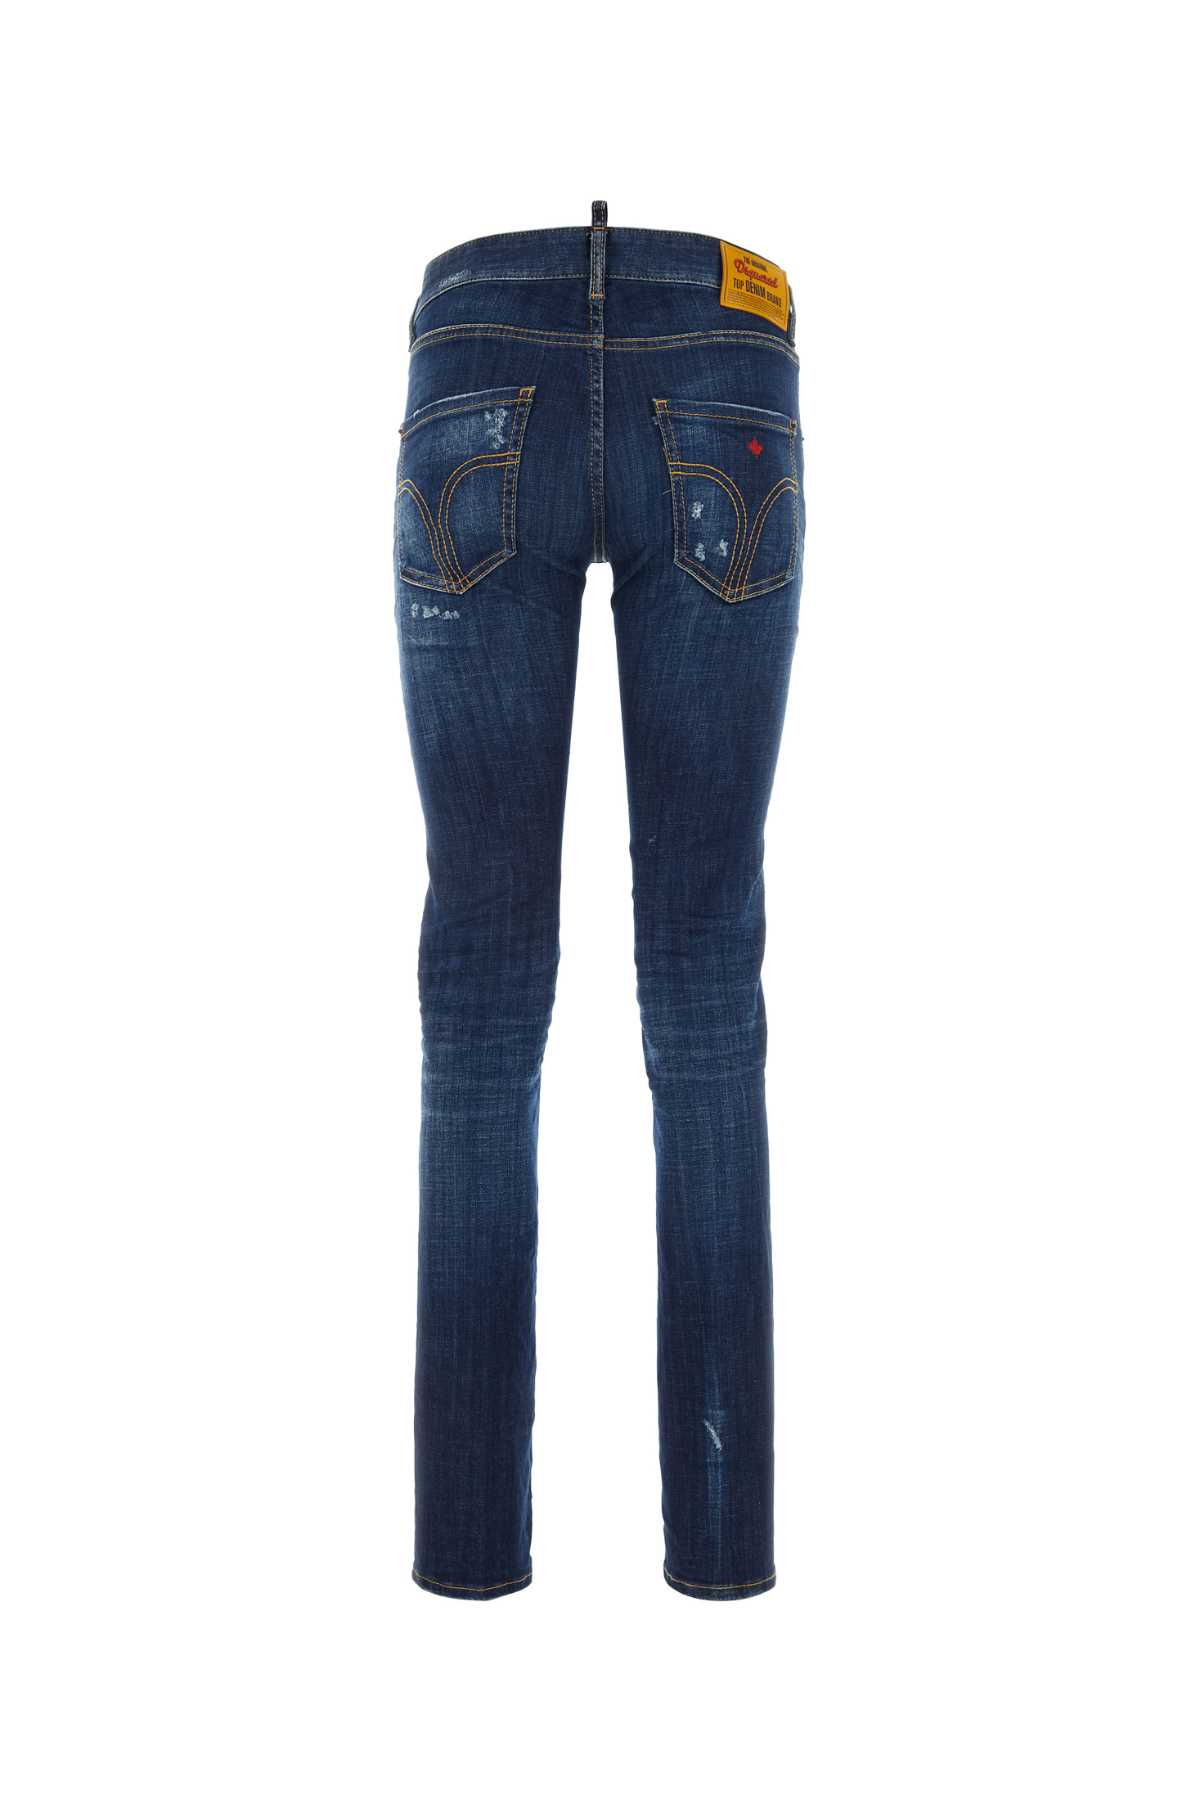 Dsquared2 Stretch Denim Jeans In Navyblue